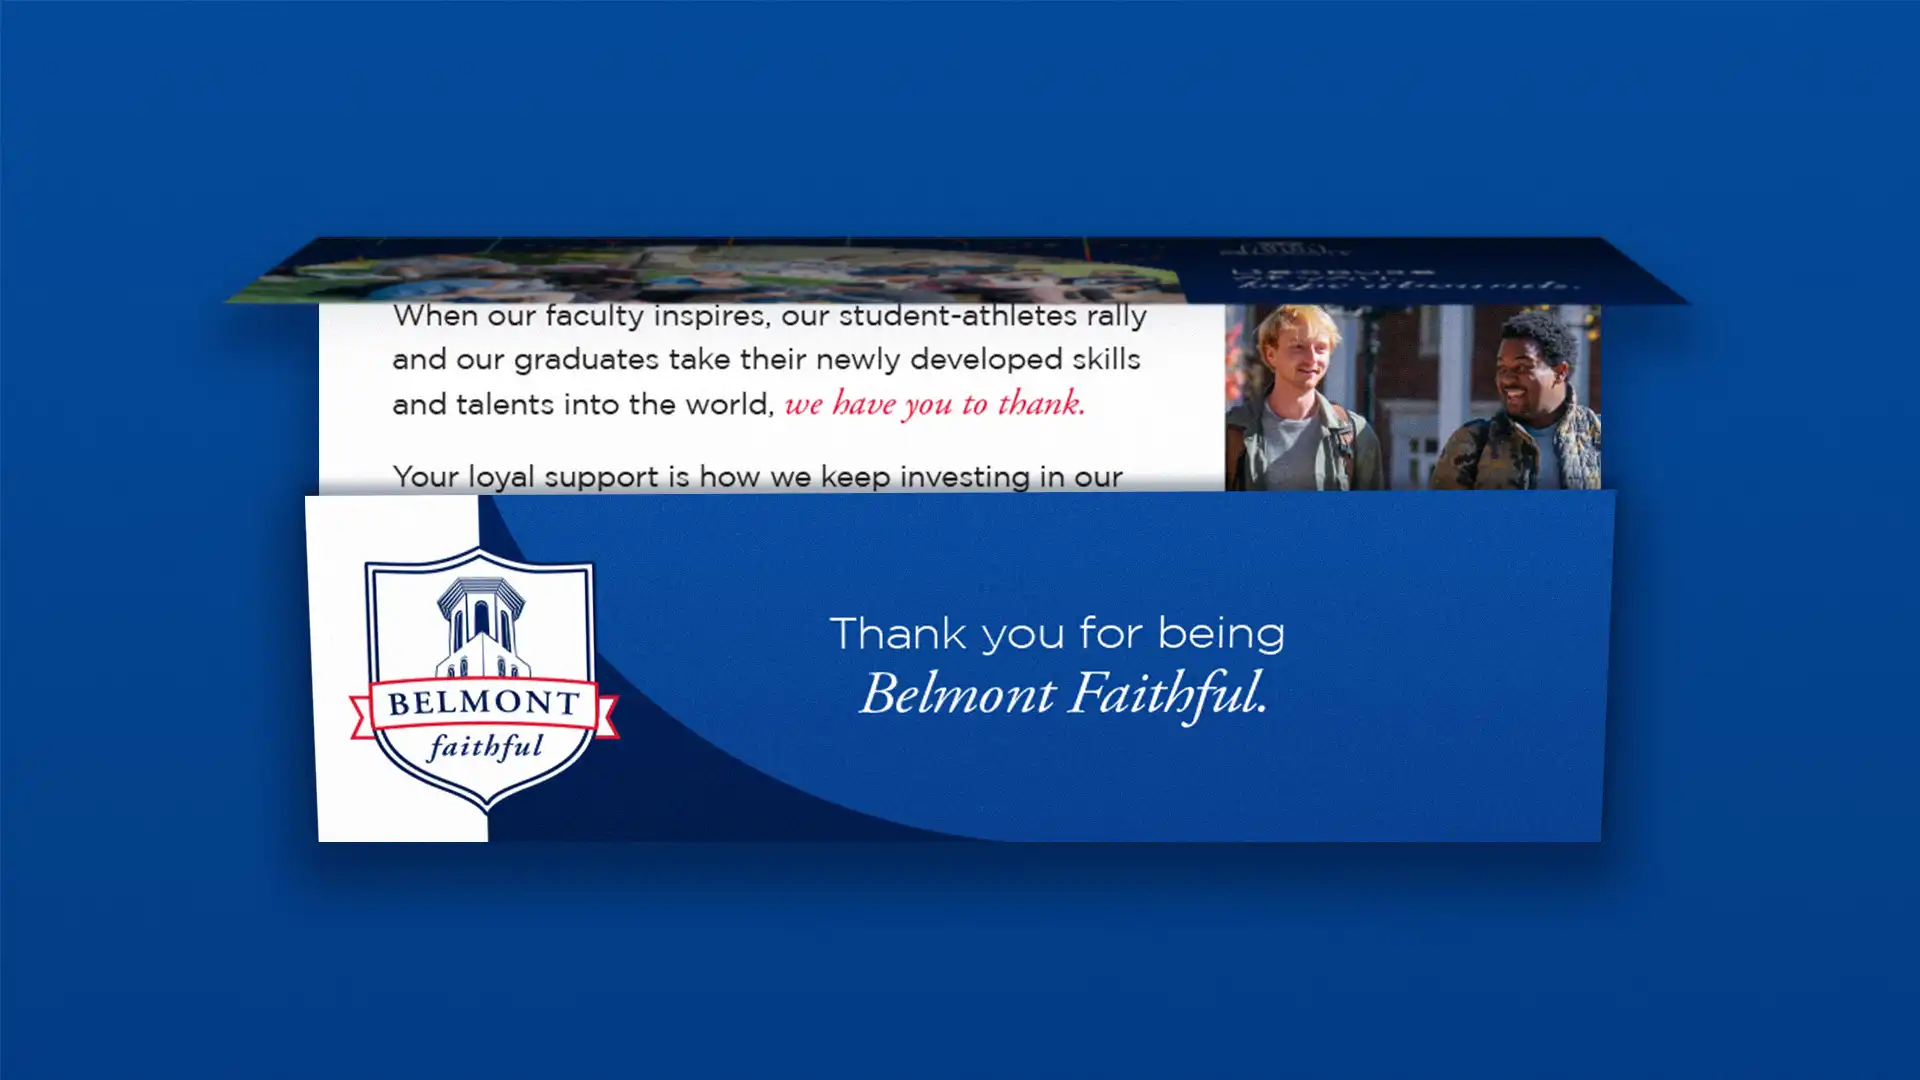 Belmont University alumni fundraising campaign mailer showing the short fold with messaging.